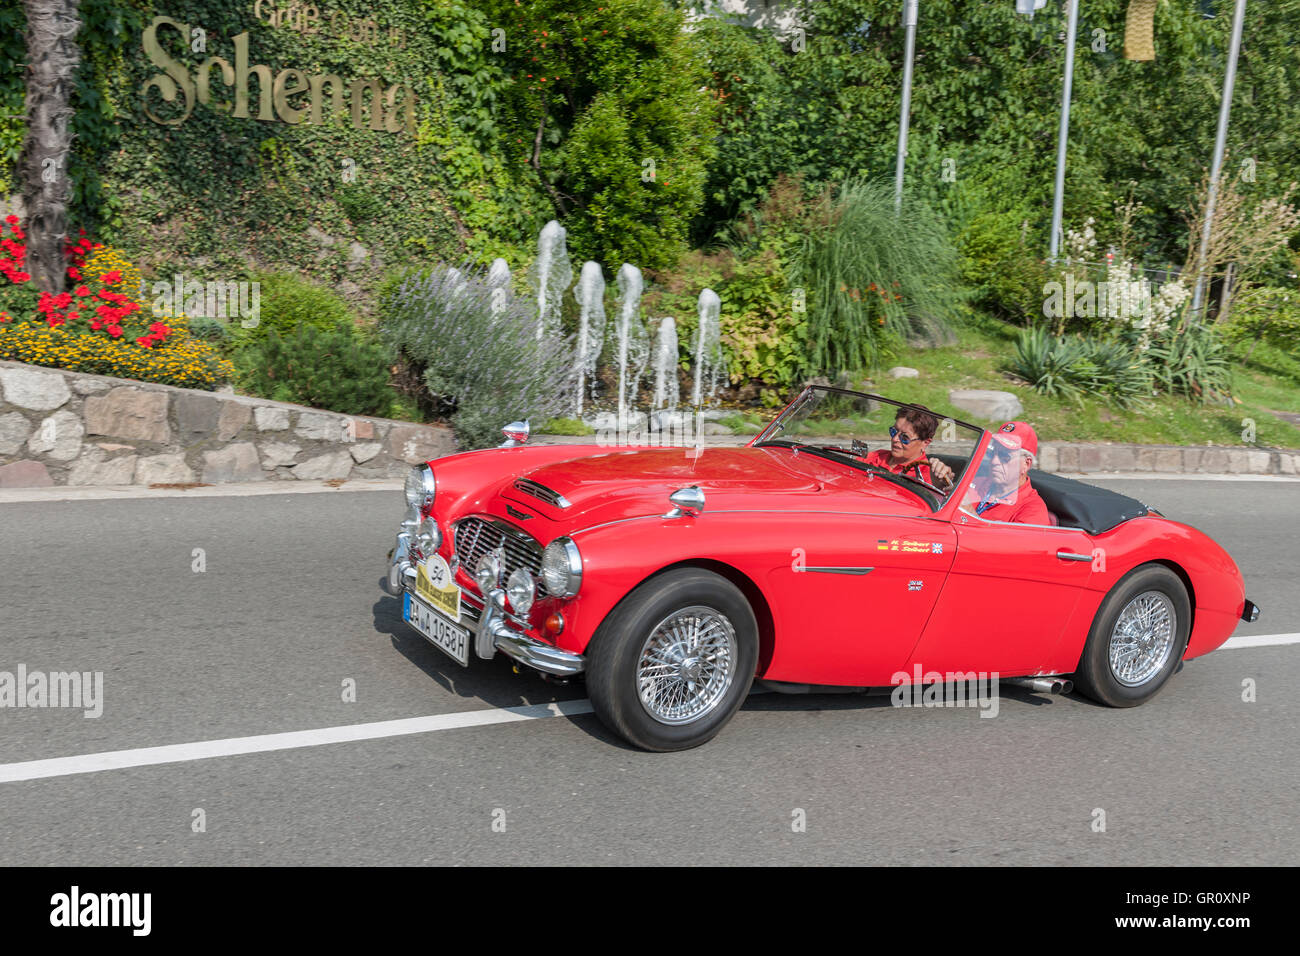 Scena, Italy - July 08, 2016: Austin Healey 100-6 BN 4 on the Scena road in the direction of Scena village Stock Photo